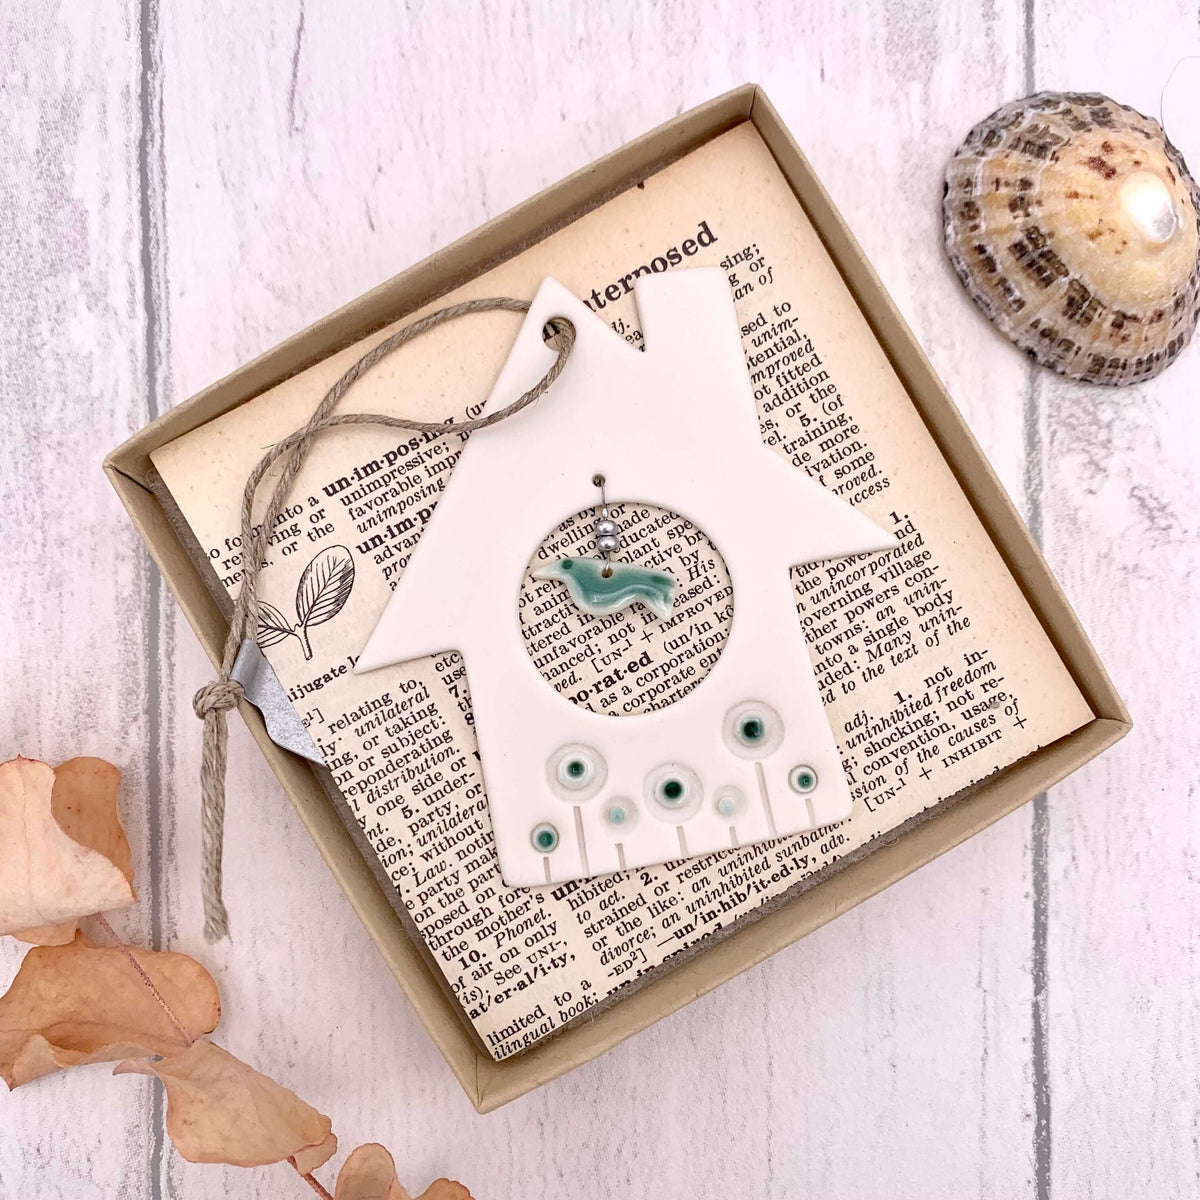 Handmade in the UK, boxed porcelain hanging of a house and bird, with glazed detailing and glass beads.